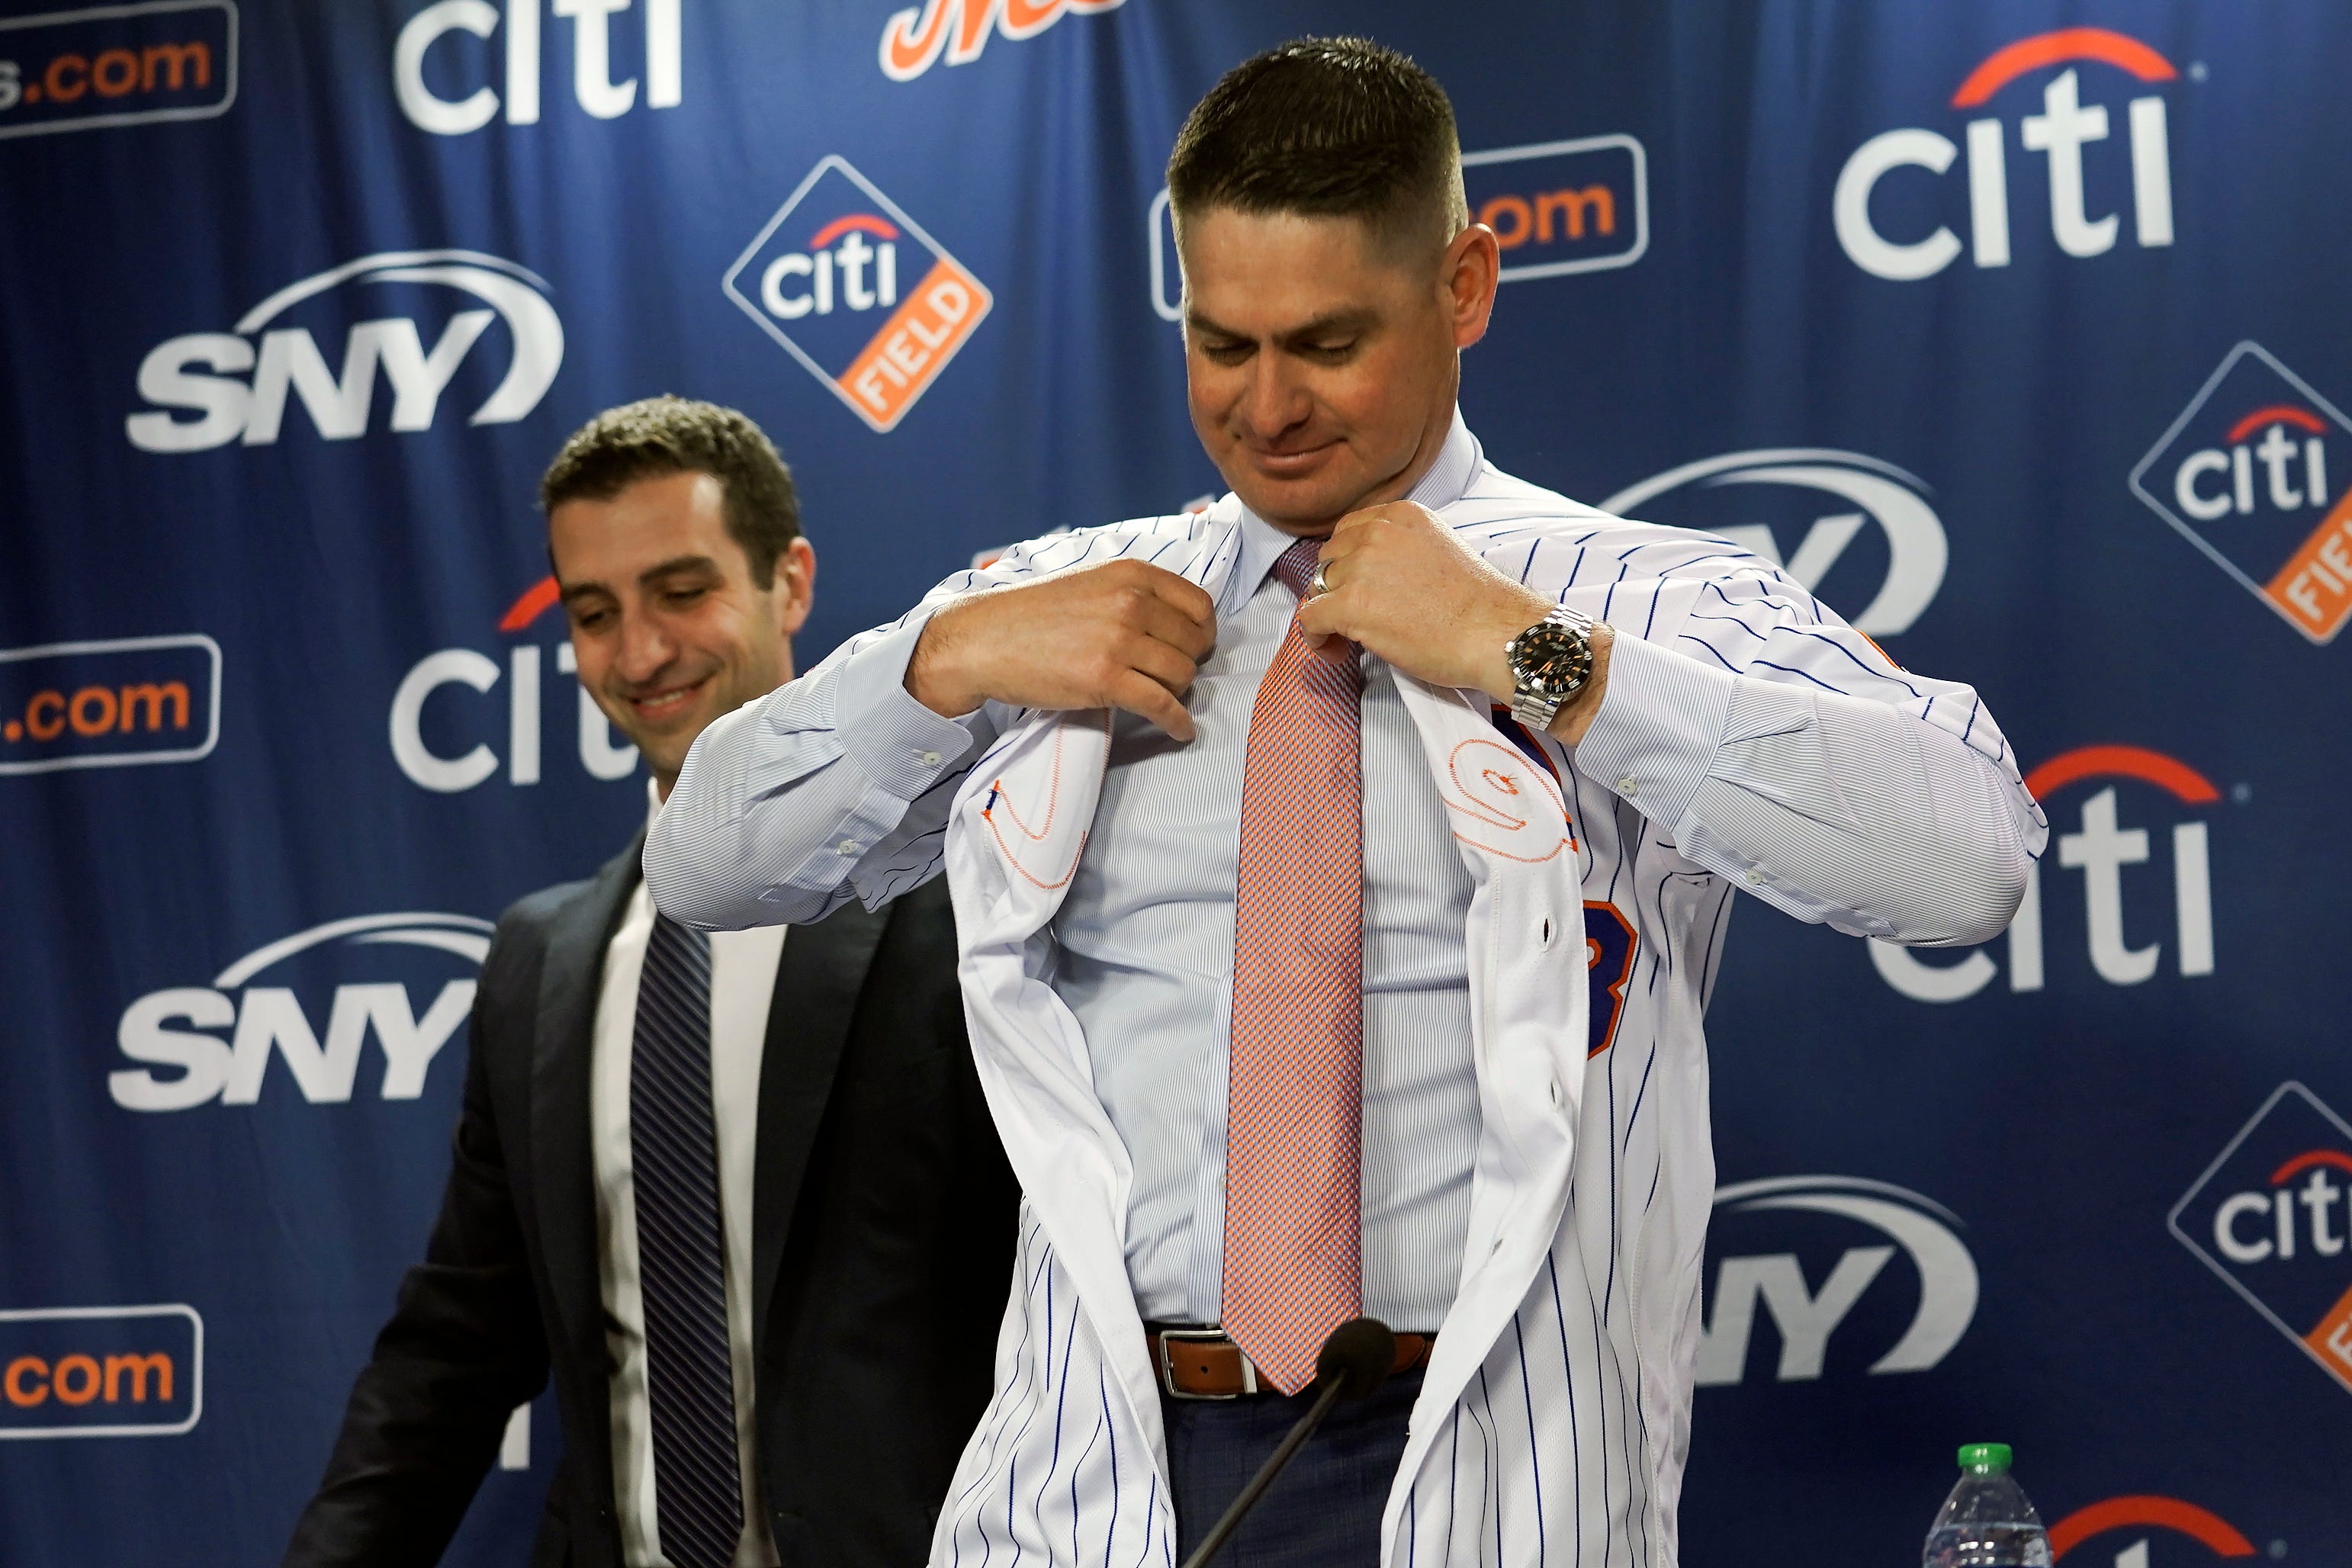 3 things that stood out from carlos mendoza's opening address at mets spring training